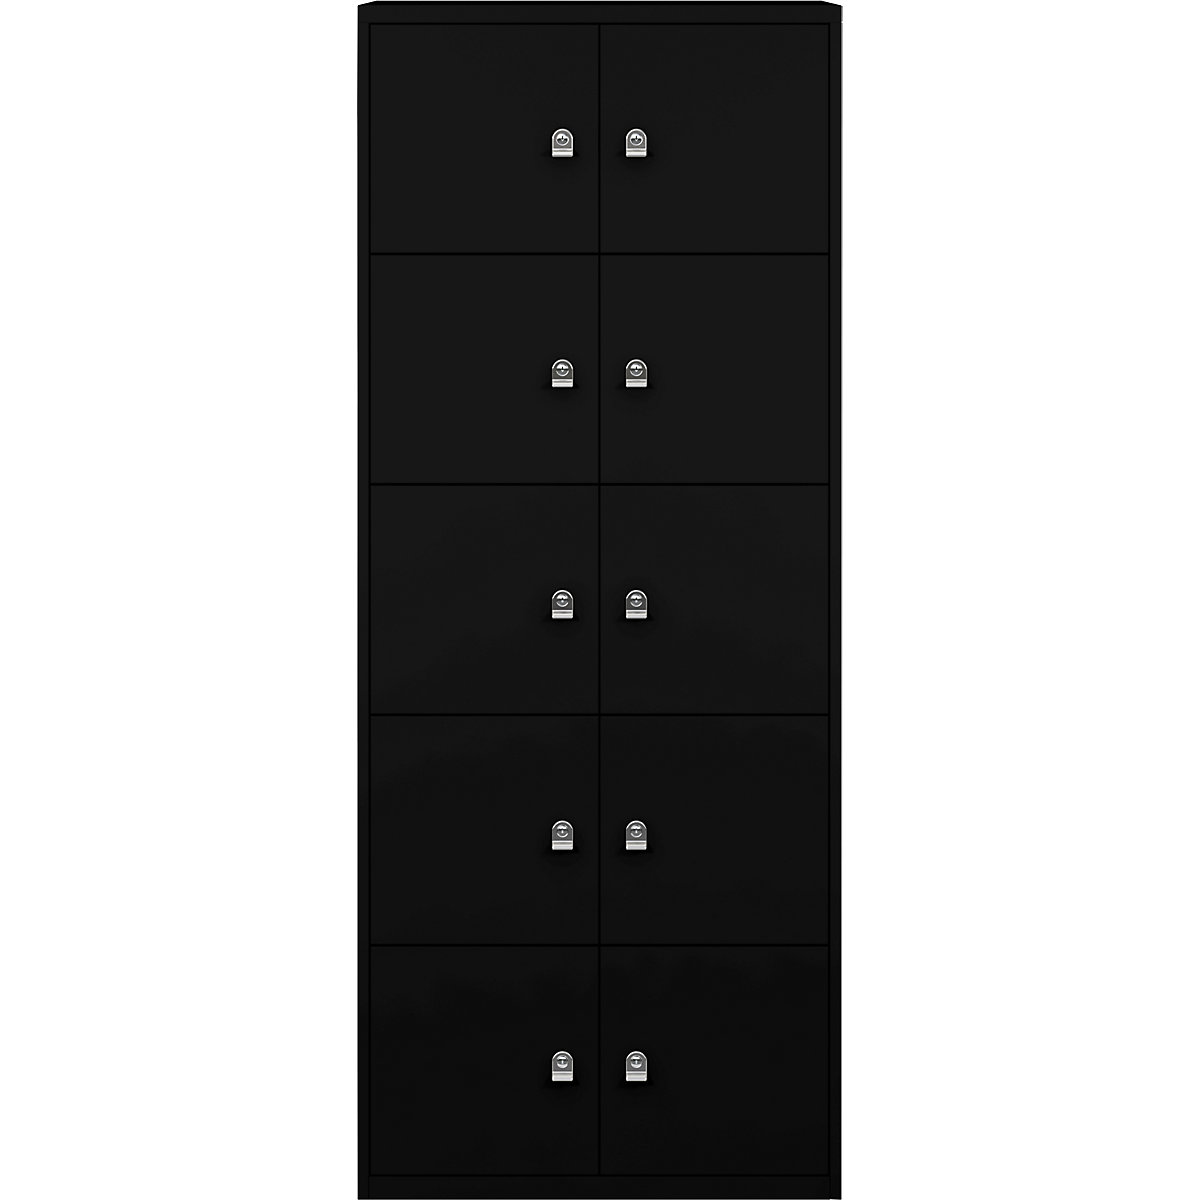 LateralFile™ lodge – BISLEY, with 10 lockable compartments, height 375 mm each, black